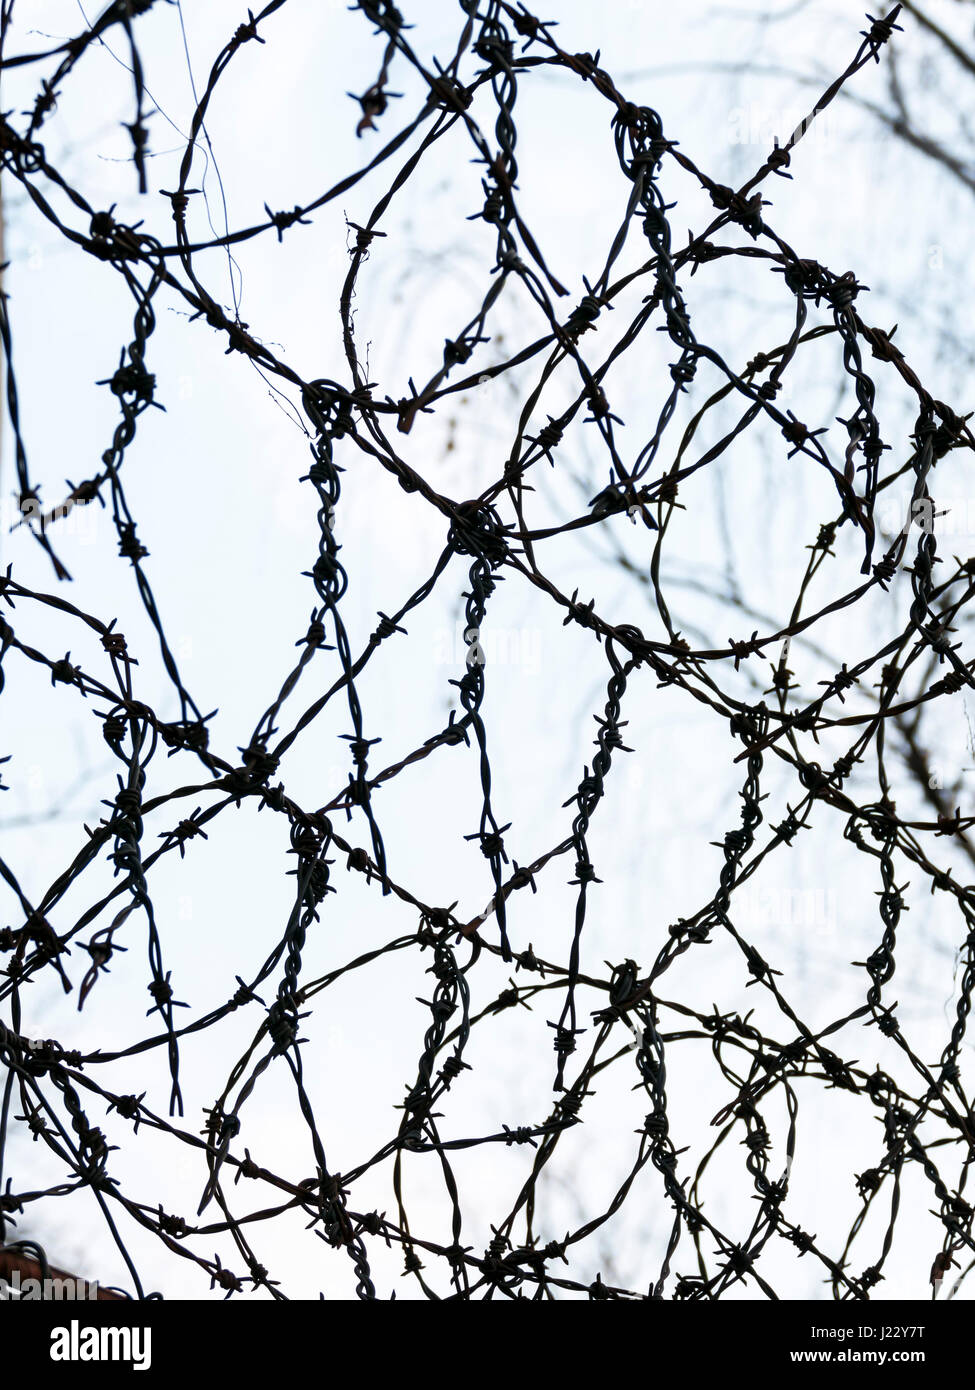 Barbed wire, close up Stock Photo